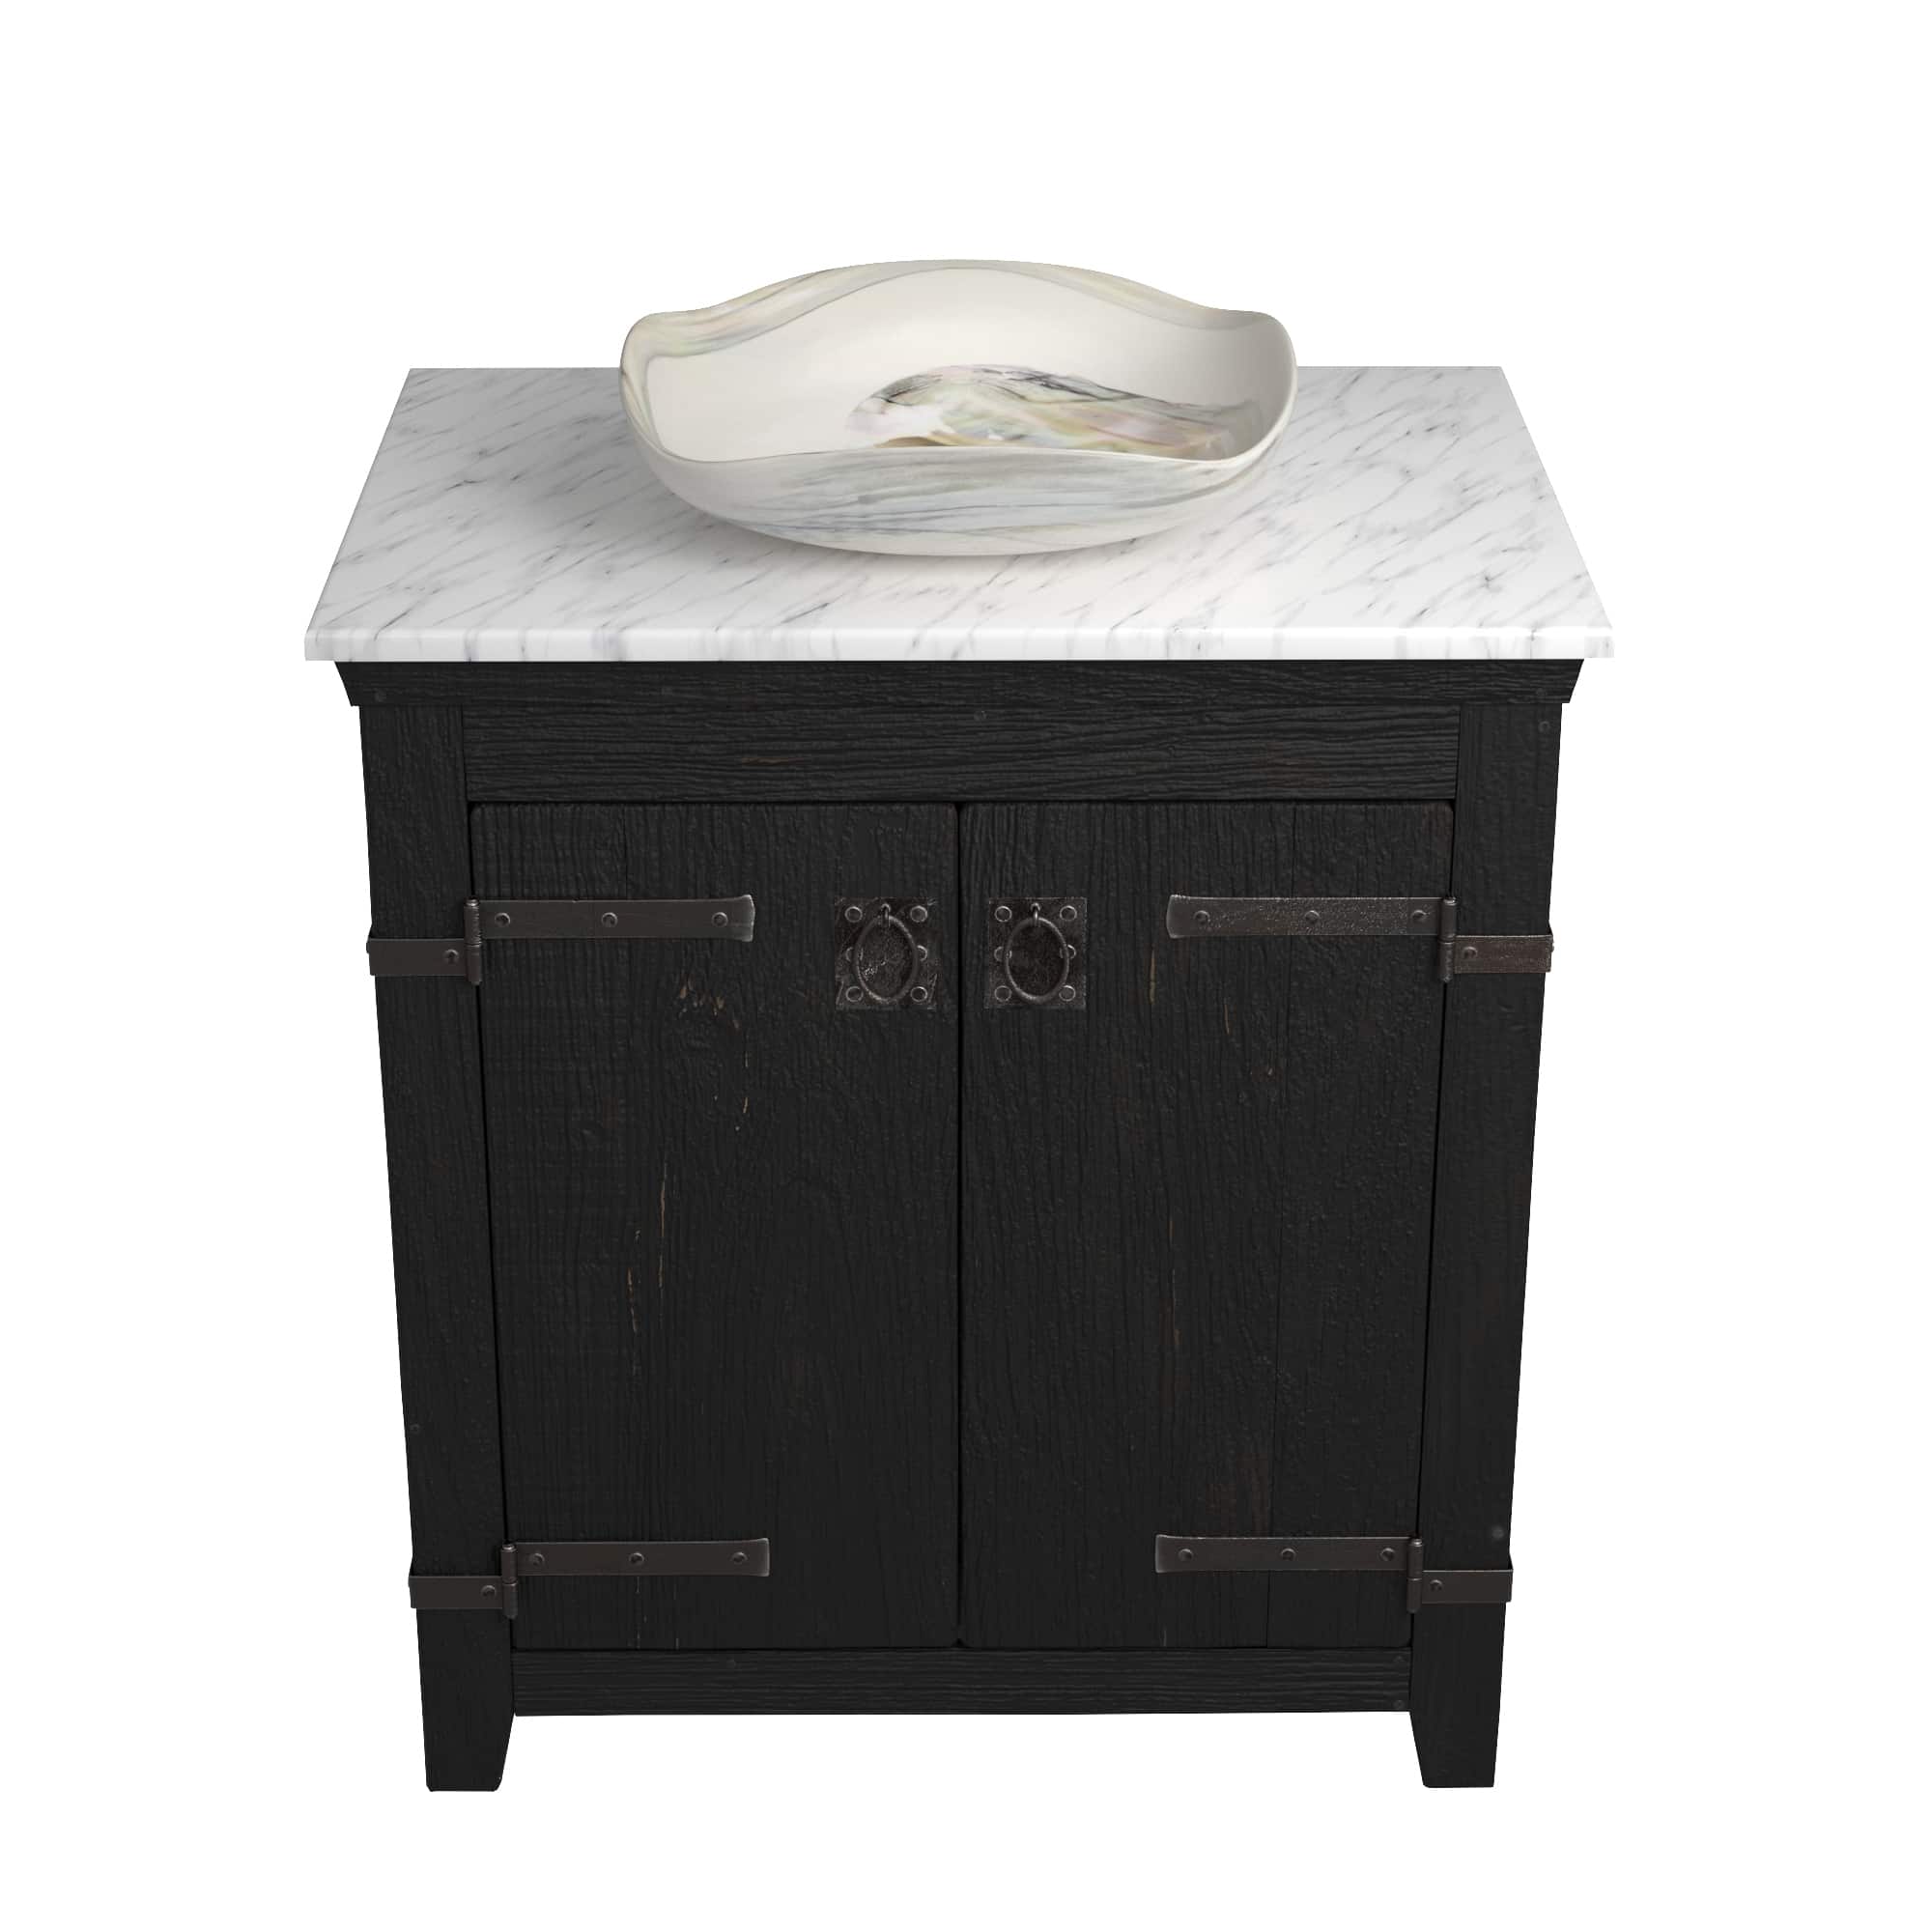 Native Trails 30" Americana Vanity in Anvil with Carrara Marble Top and Lido in Abalone, Single Faucet Hole, BND30-VB-CT-MG-005